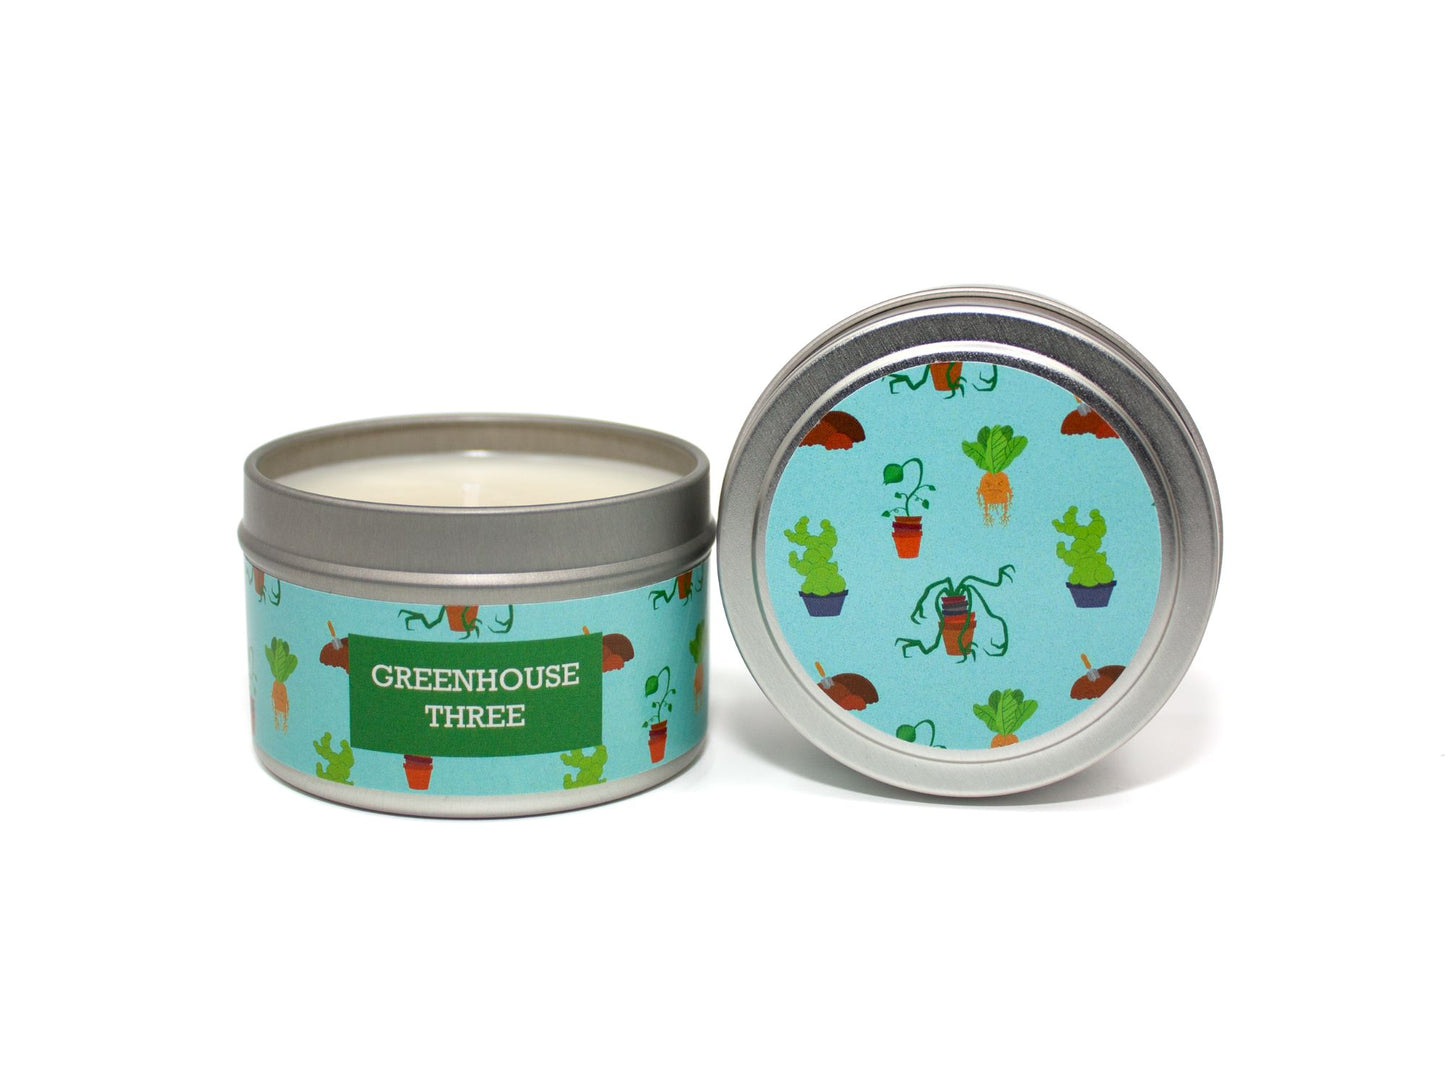 Onset & Rime foliage and earth scented candle called "Greenhouse Three" in a 4 oz silver tin. The circular label on top is sky blue featuring various magical plants. The text on the front label is "Greenhouse Three - Lush Foliage, Humid Air, Damp Earth".